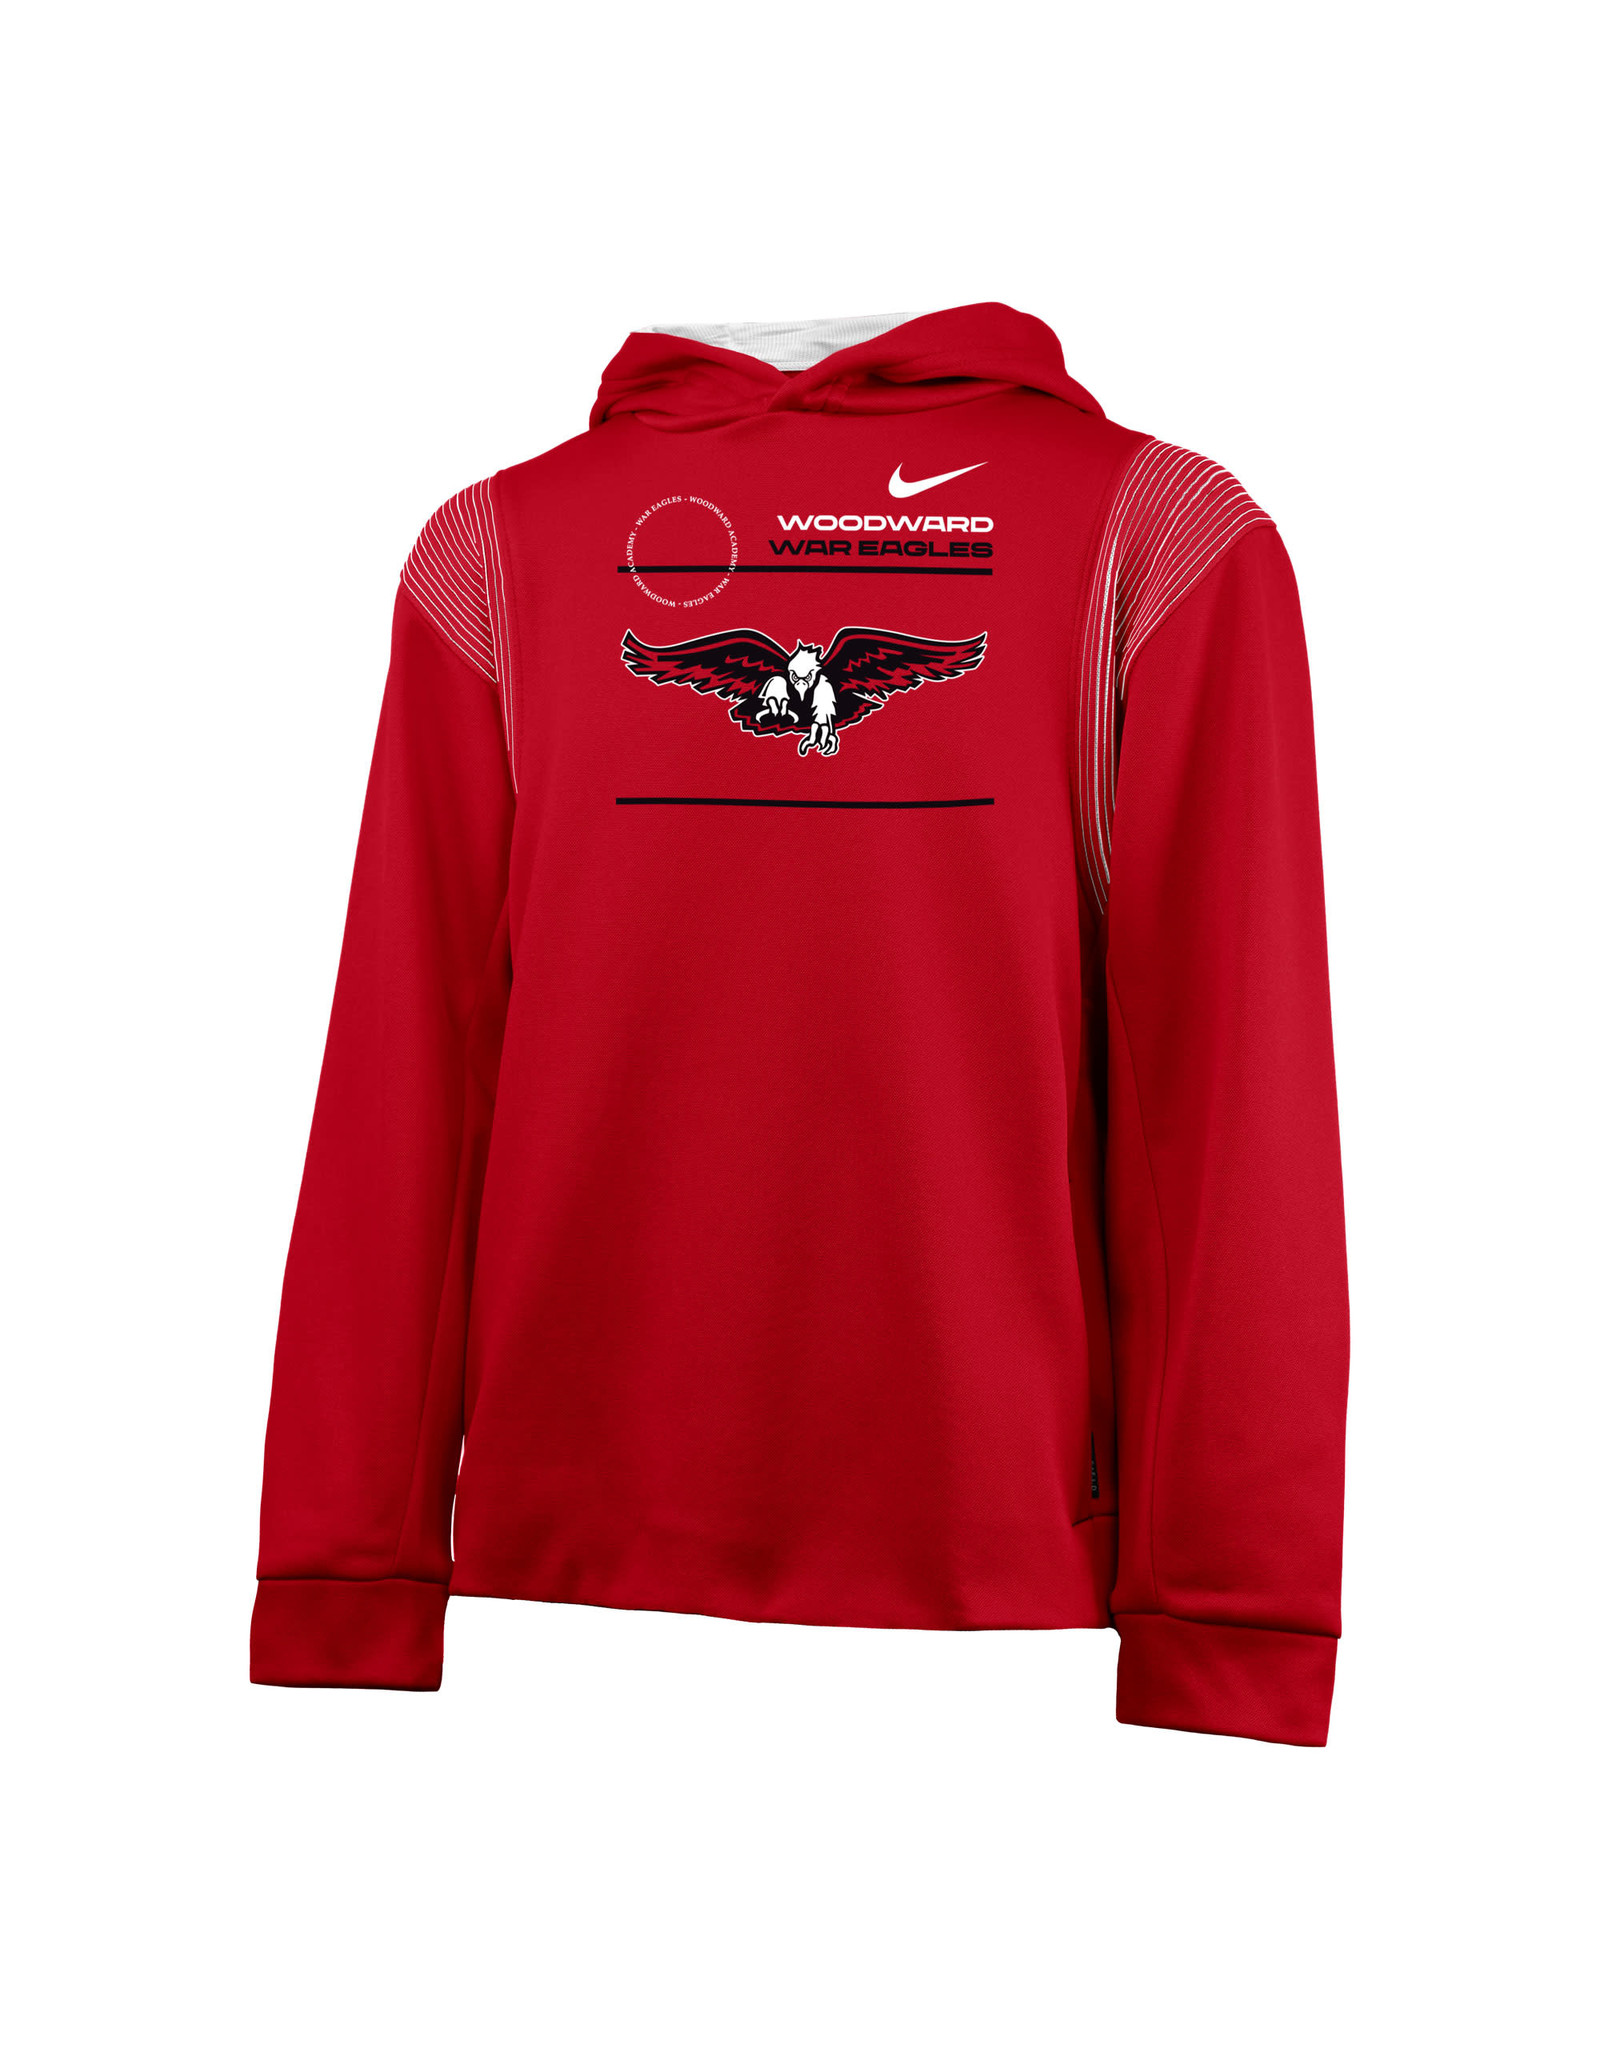 NIKE Youth Thermo PO Hoodie (Red) - Woodward Academy